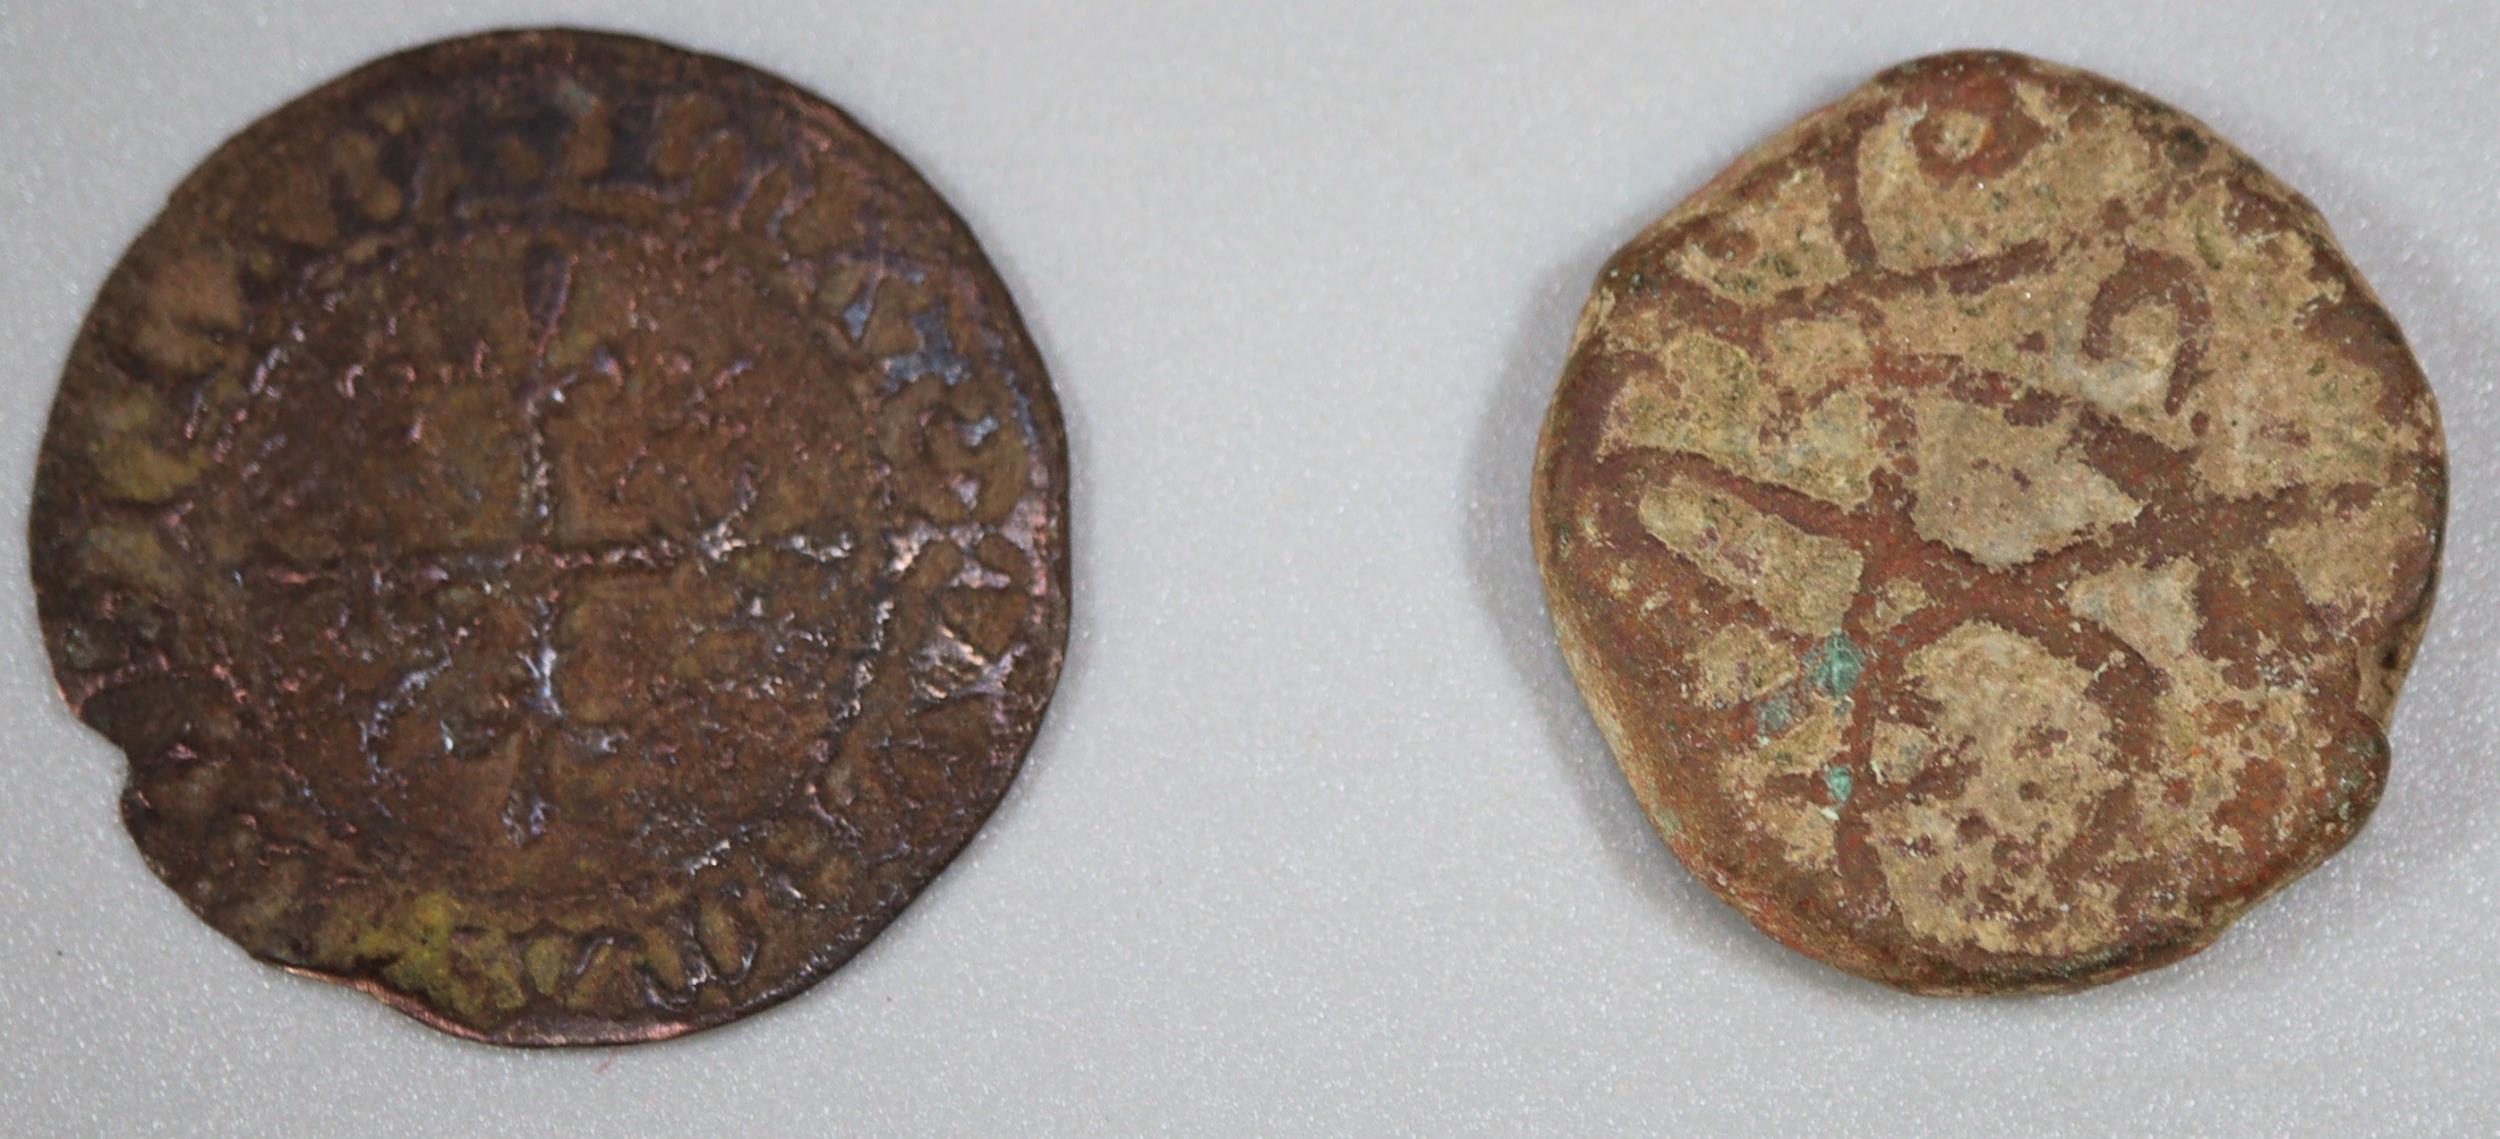 16th/17th century French Jetton copper alloy token together with a probably 16th/17th century copper - Image 2 of 6